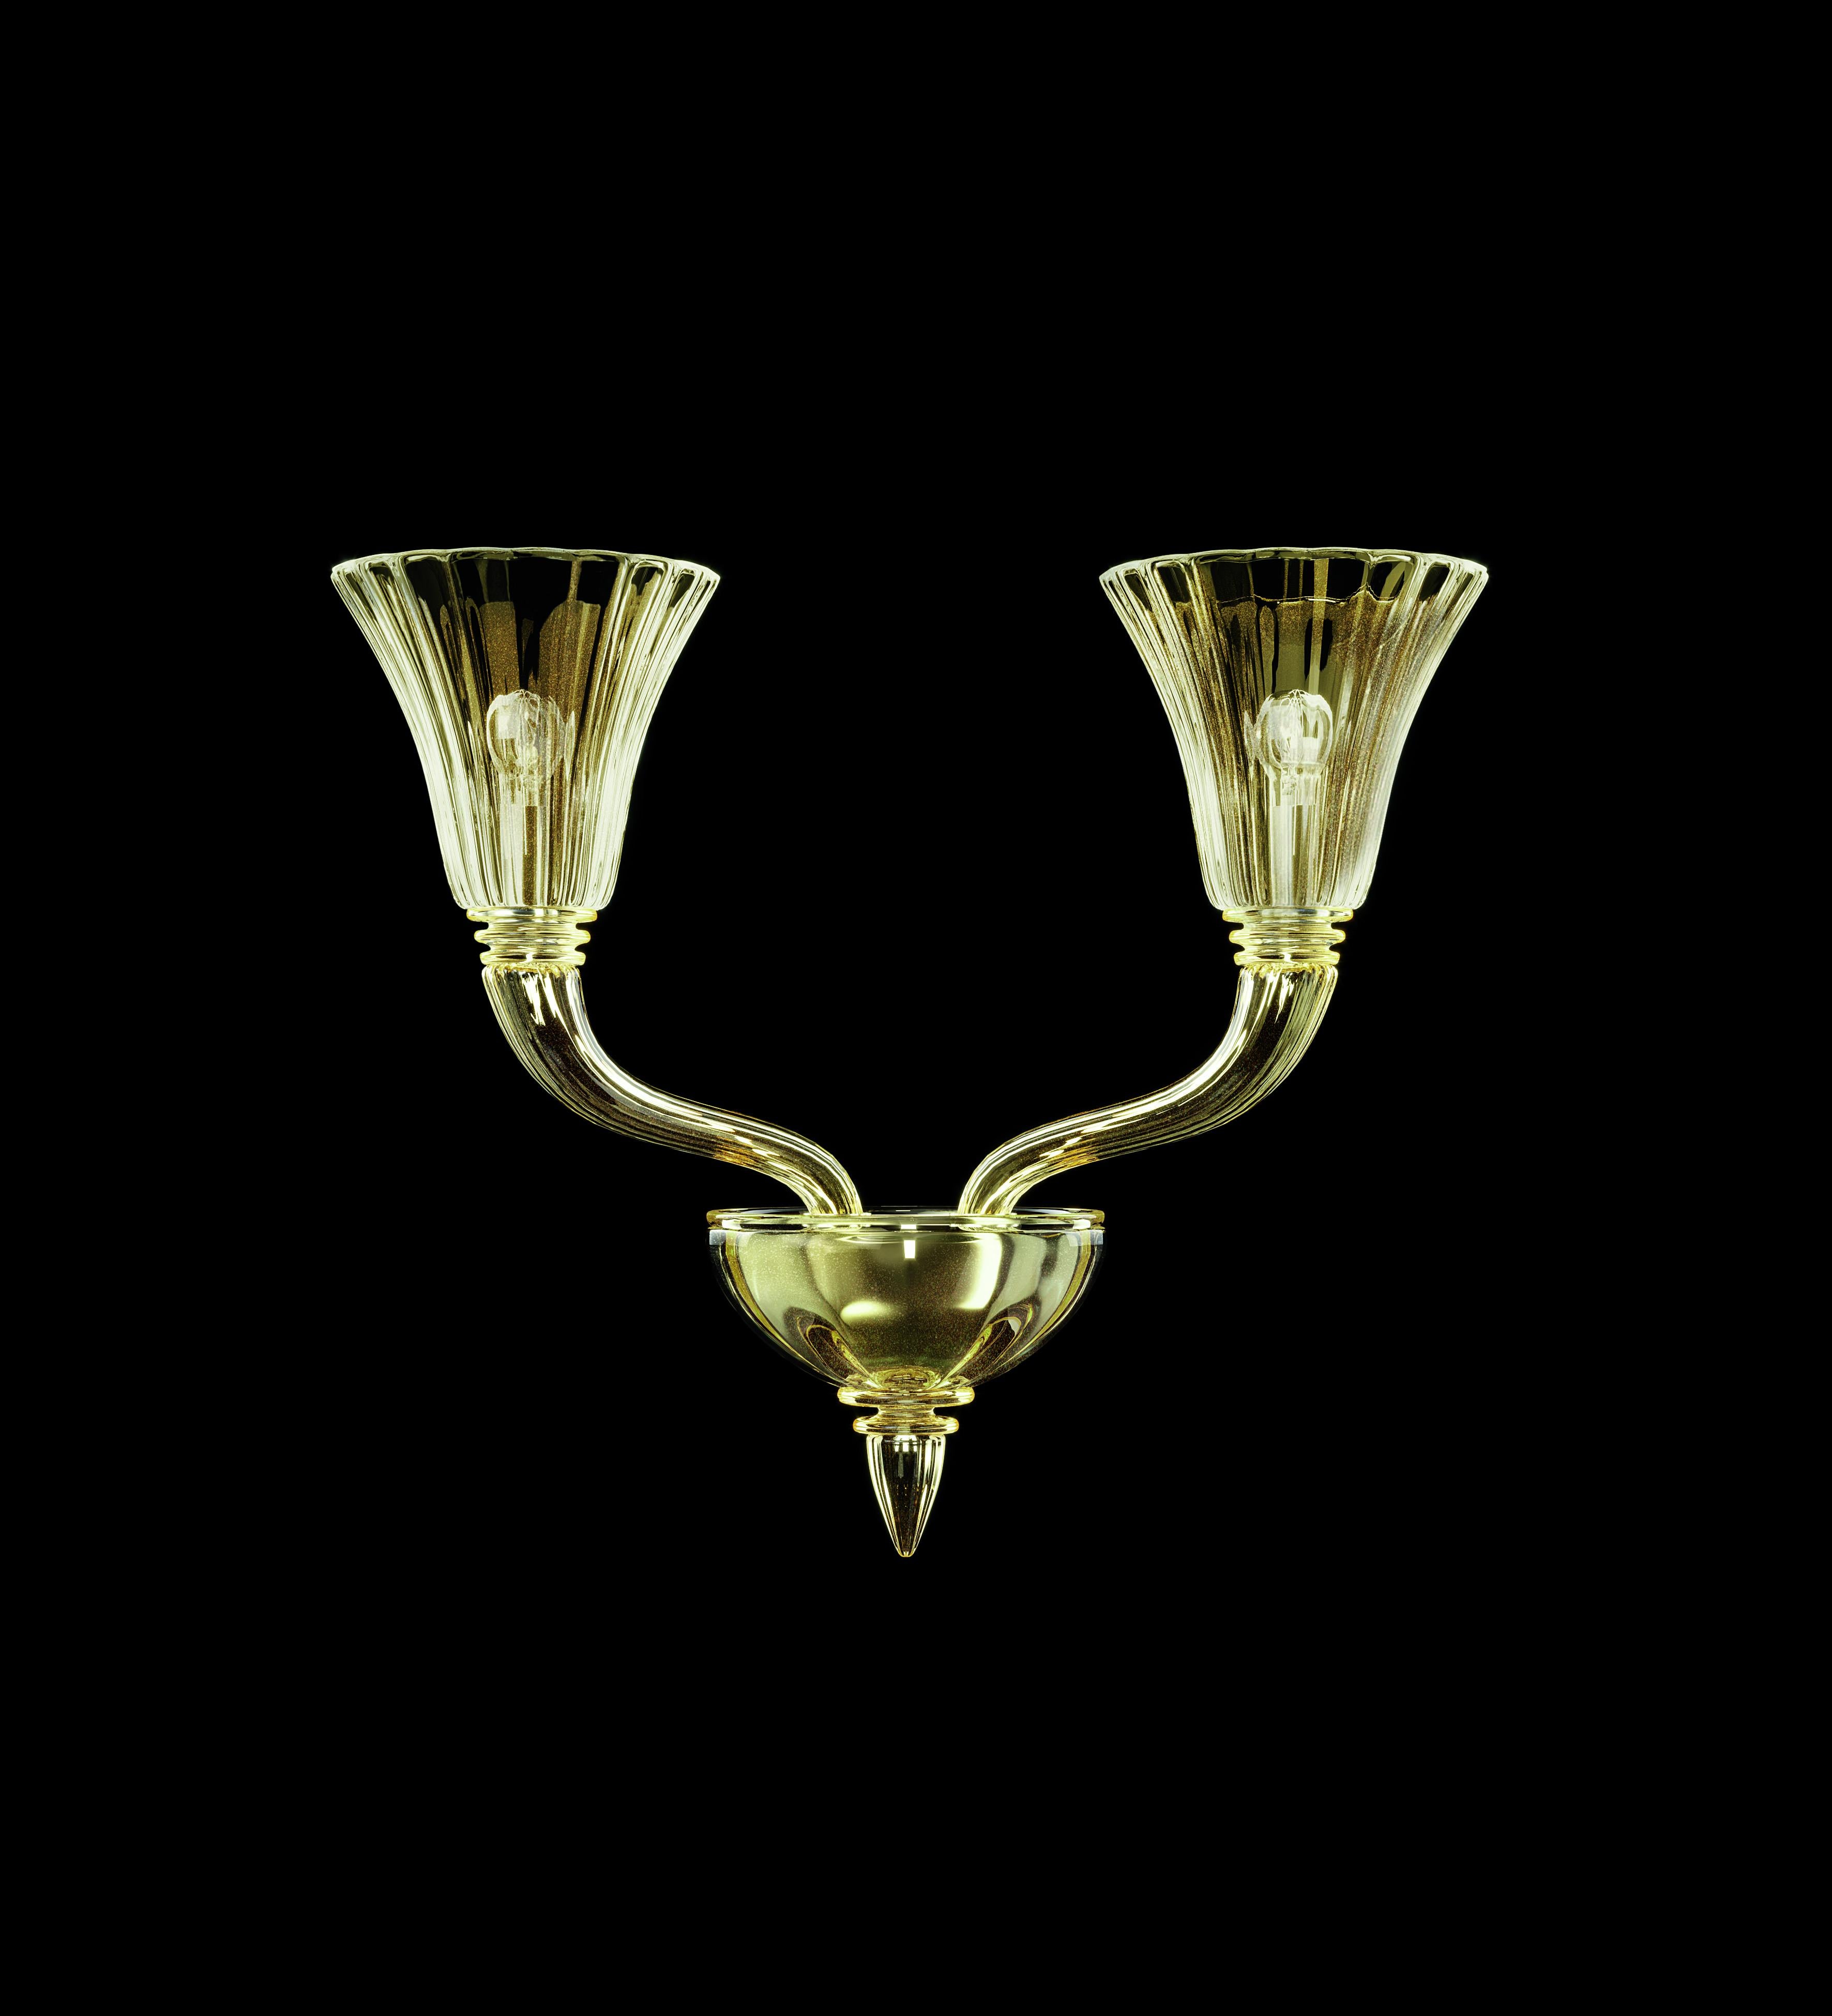 The Degas 5554 wall sconce was originally designed in 2004. Here you are offered the Degas wall sconce in gold blown glass with a galvanized gold finish. This slender chandelier takes its name from one of the most famous impressionists, and has a